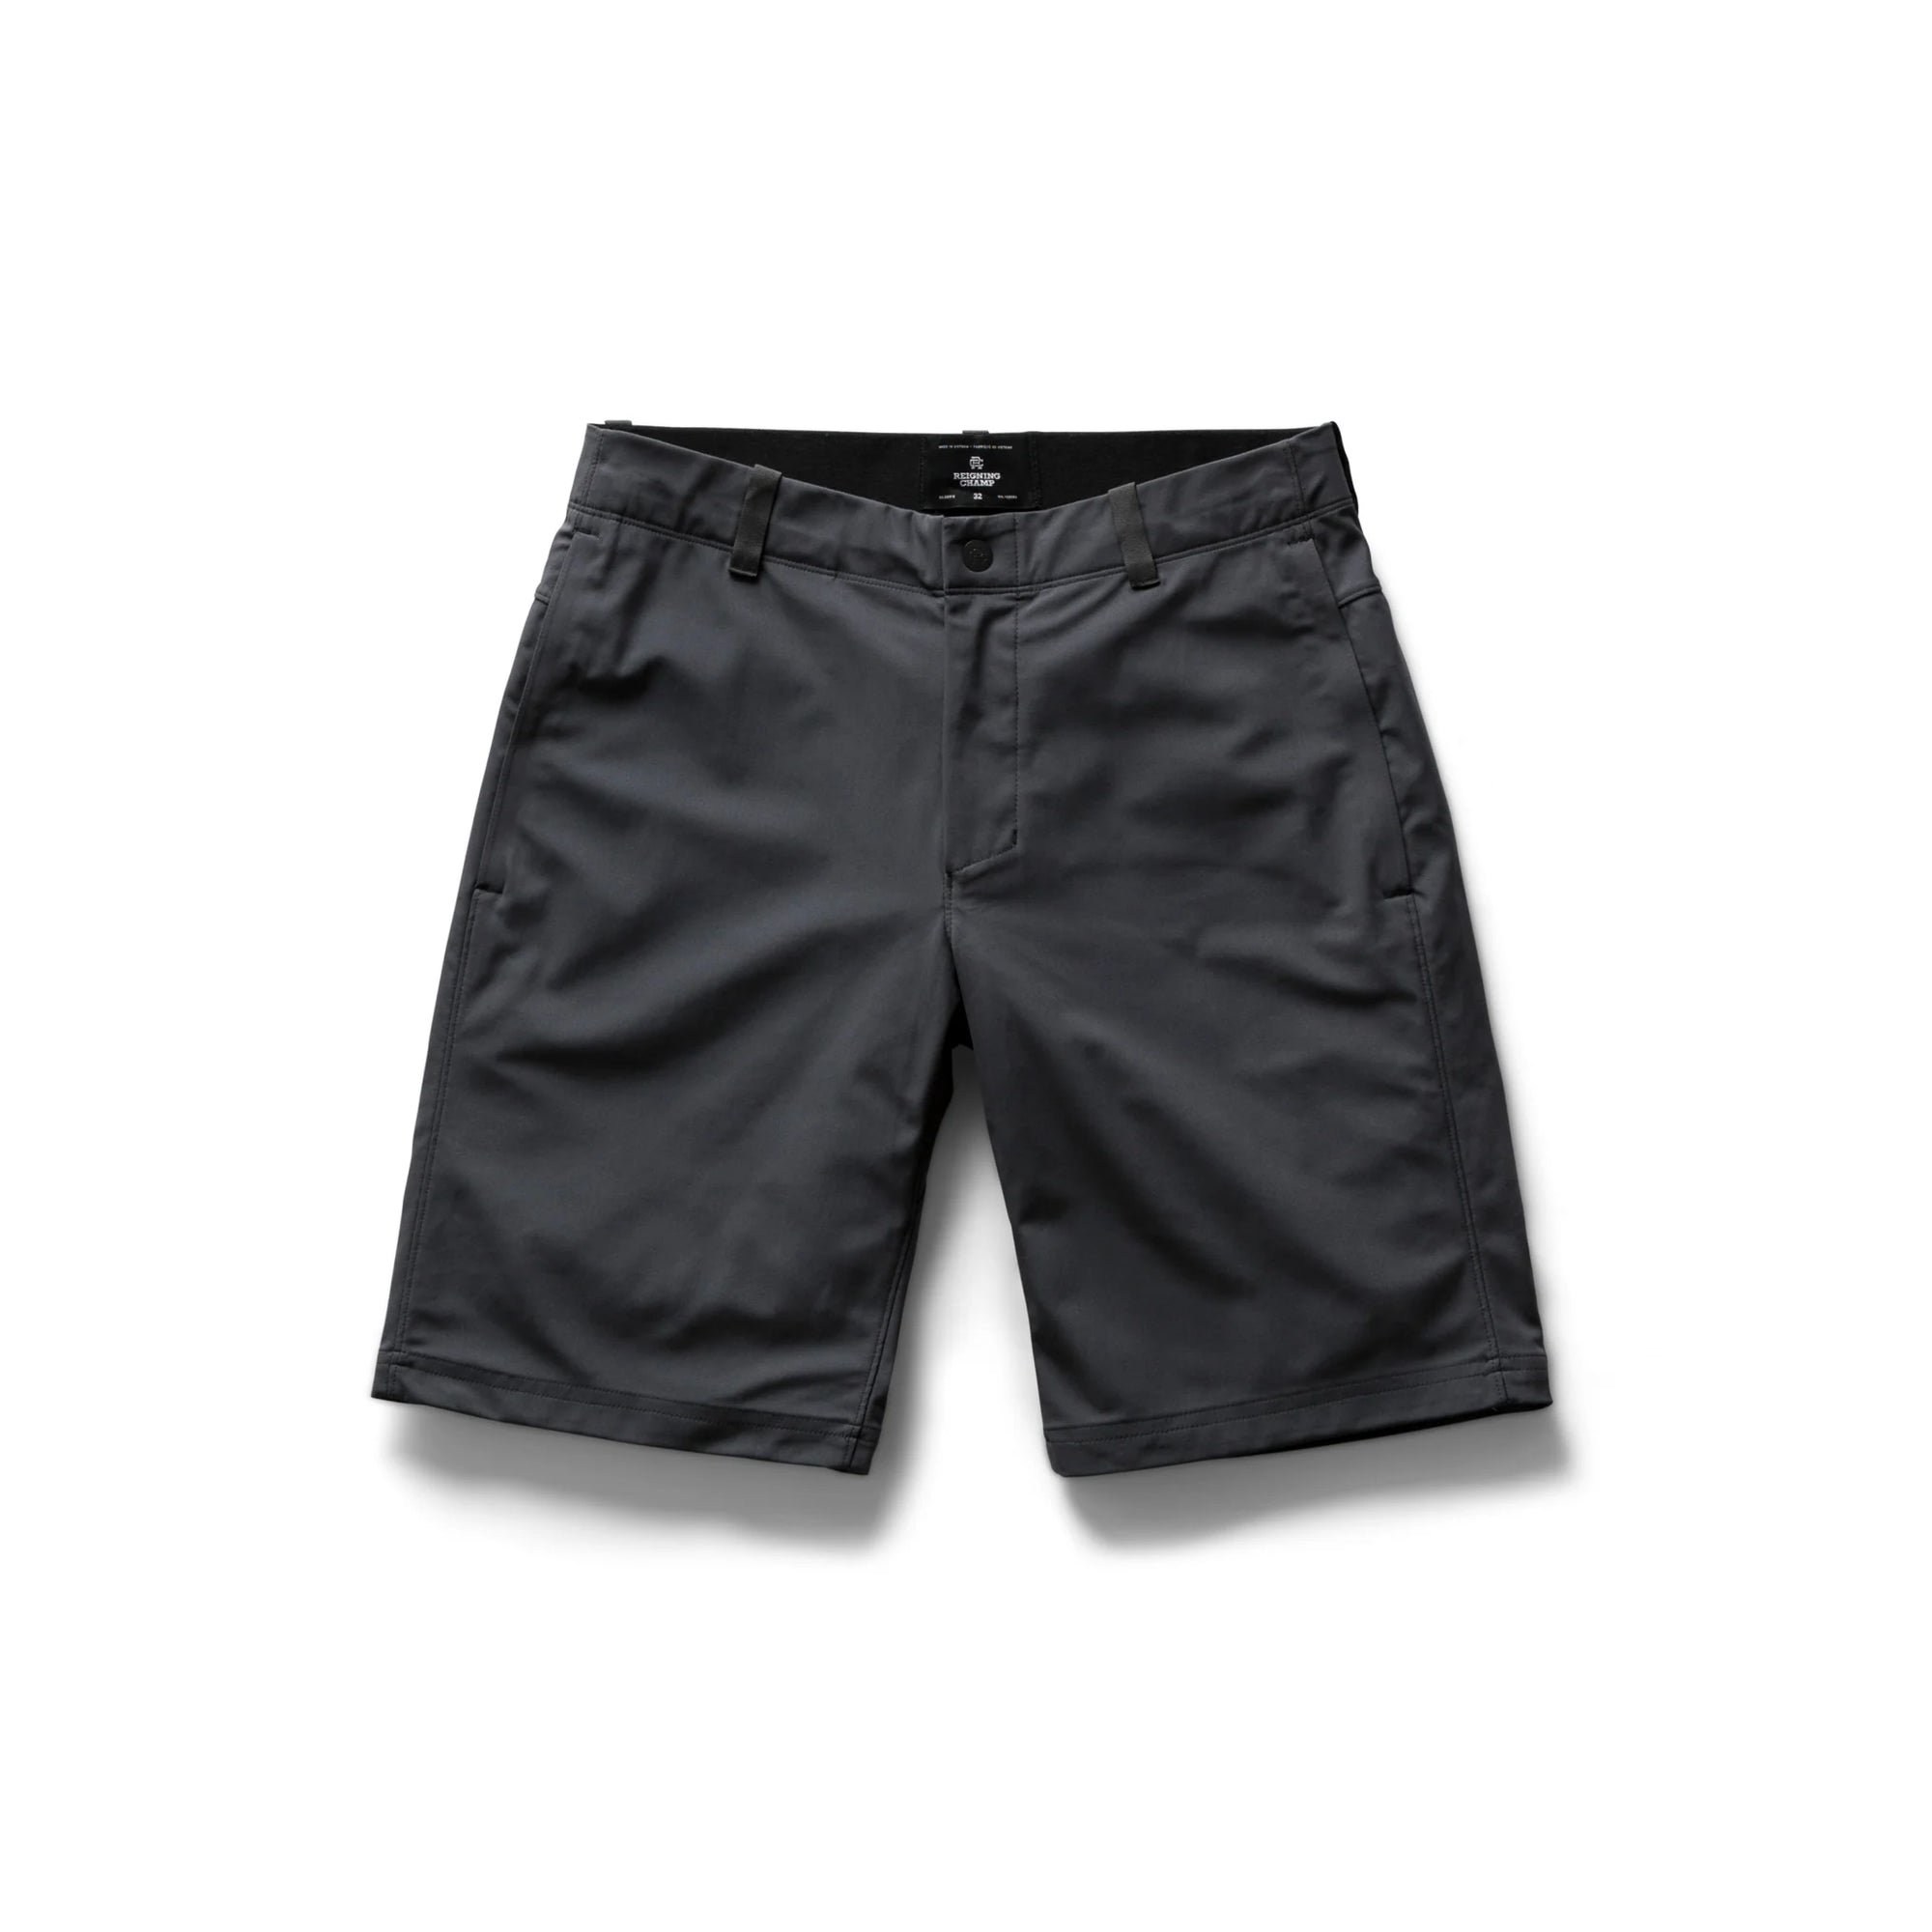 Reigning Champ Coach's Short Primeflex in Charcoal